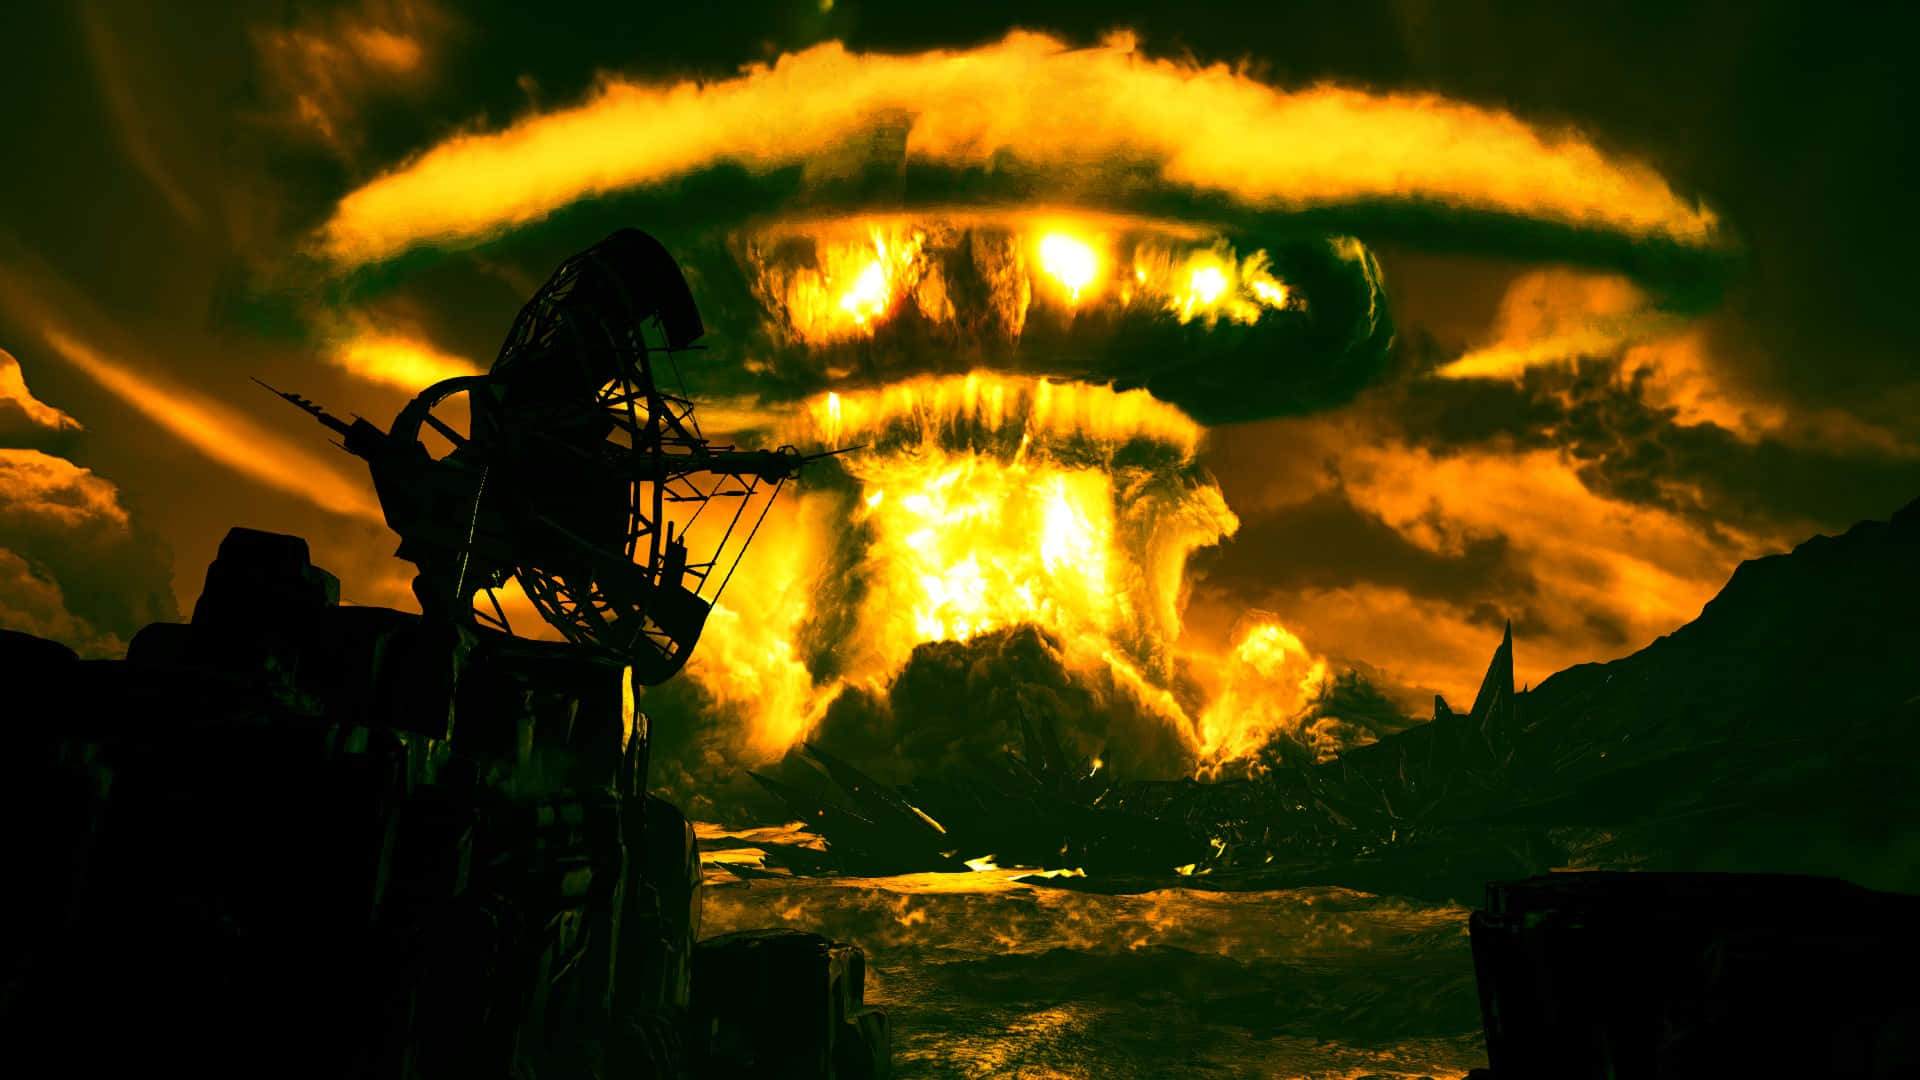 Apocalyptic_ Nuclear_ Explosion Background